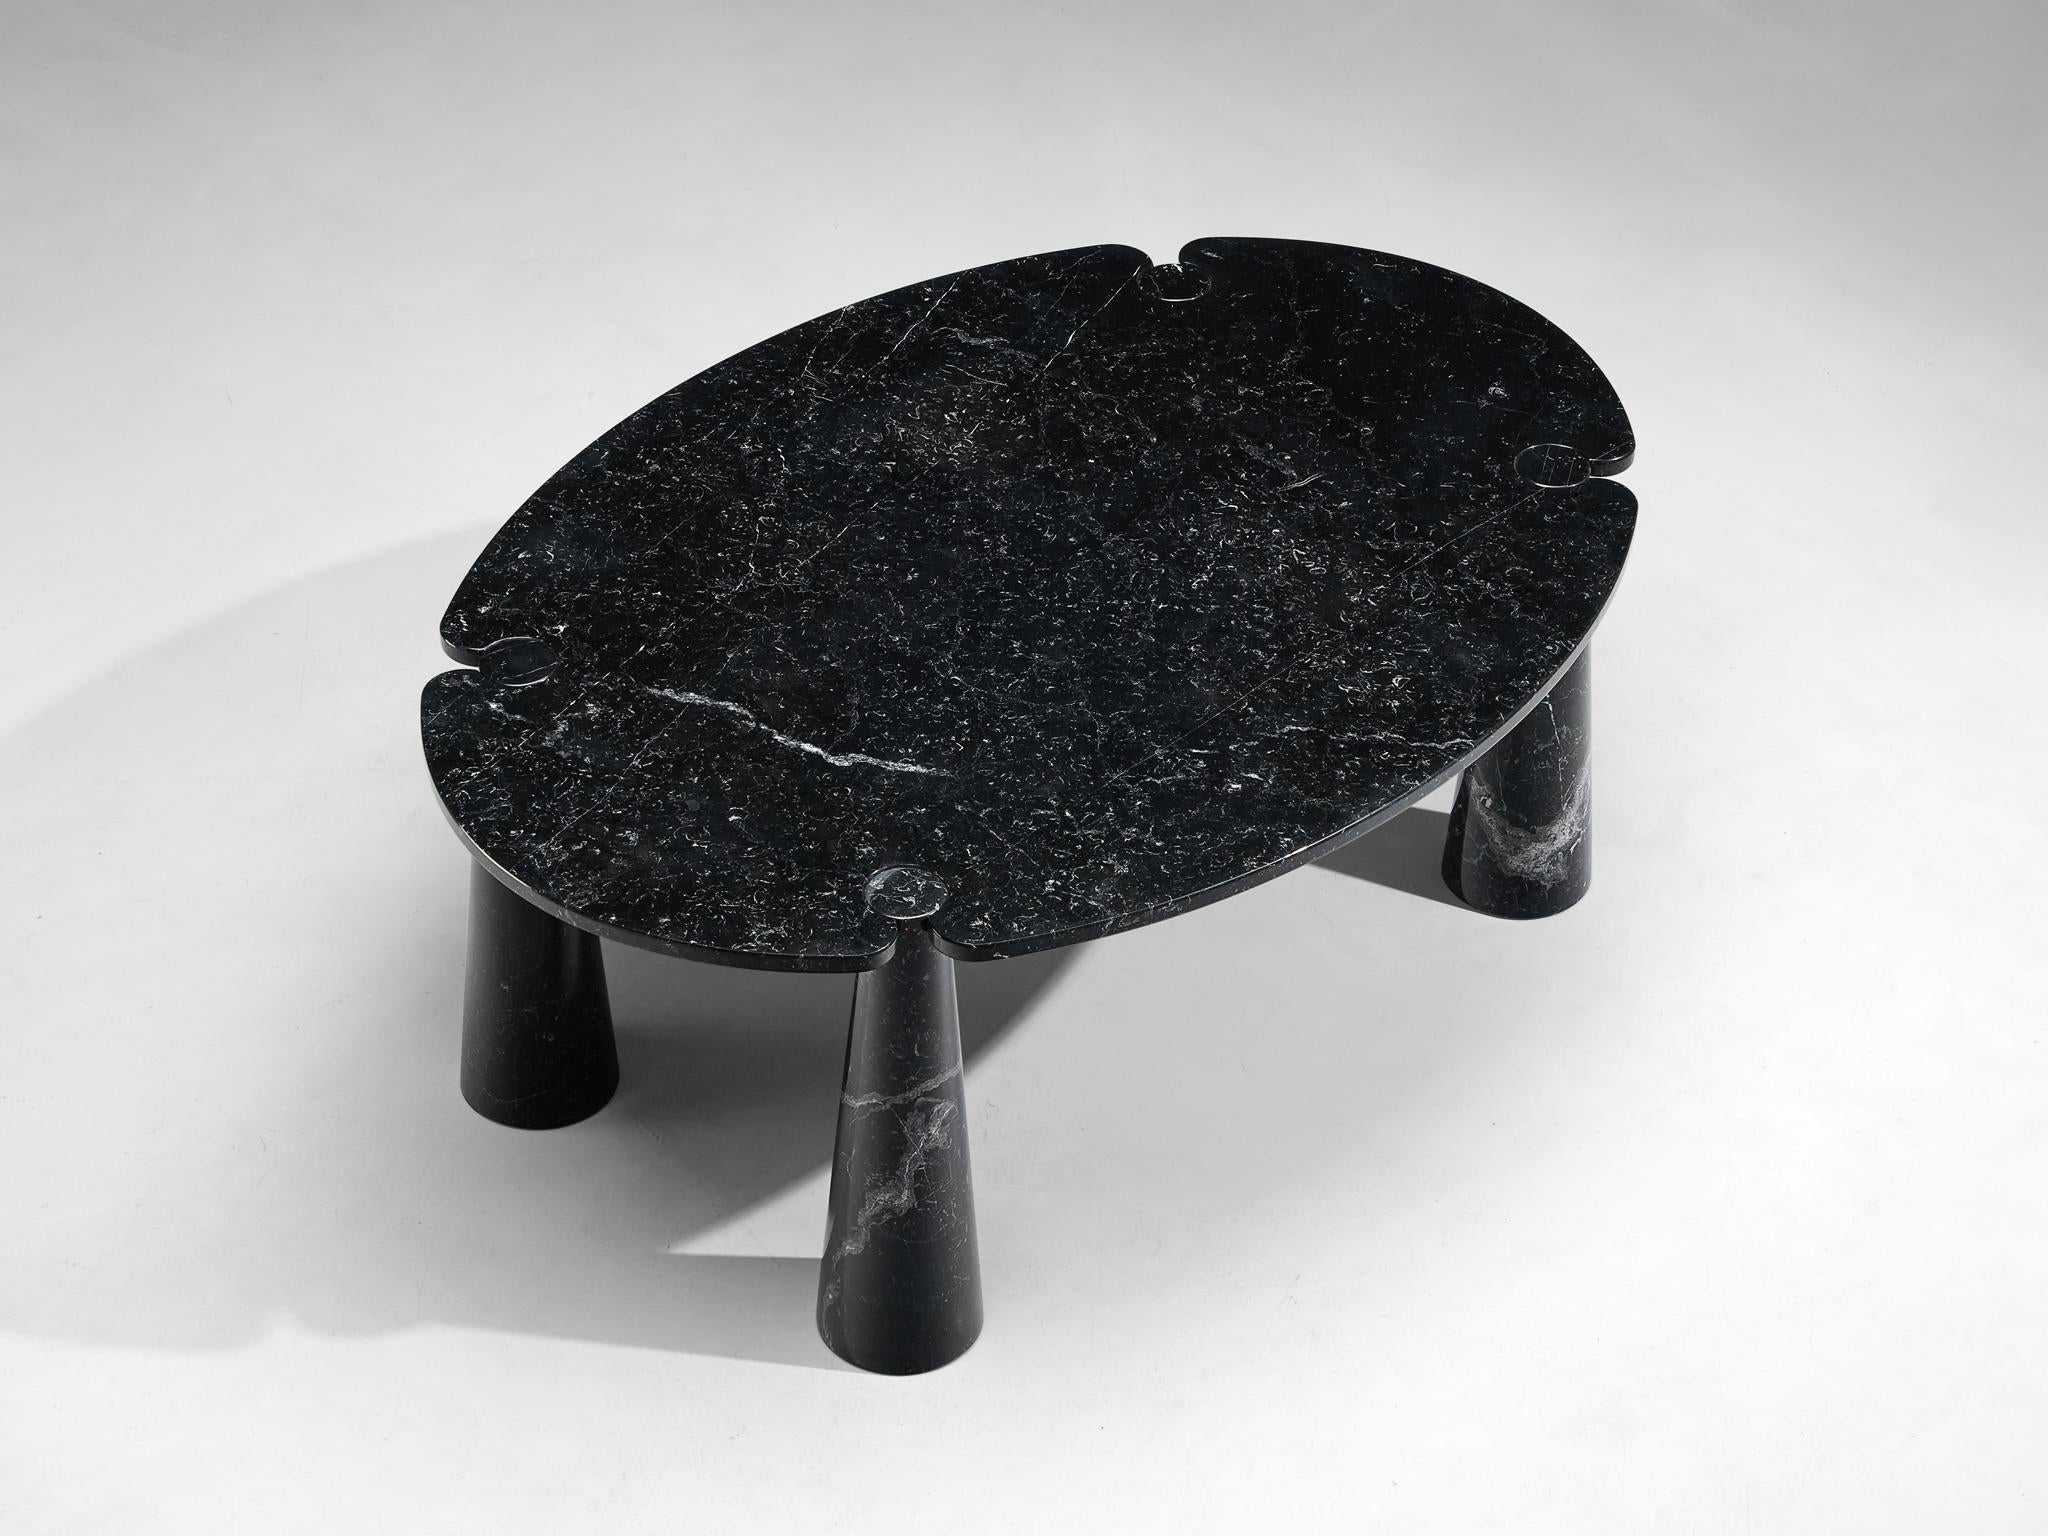 Angelo Mangiarotti for Skipper 'Eros' Dining Table in Marquina Marble